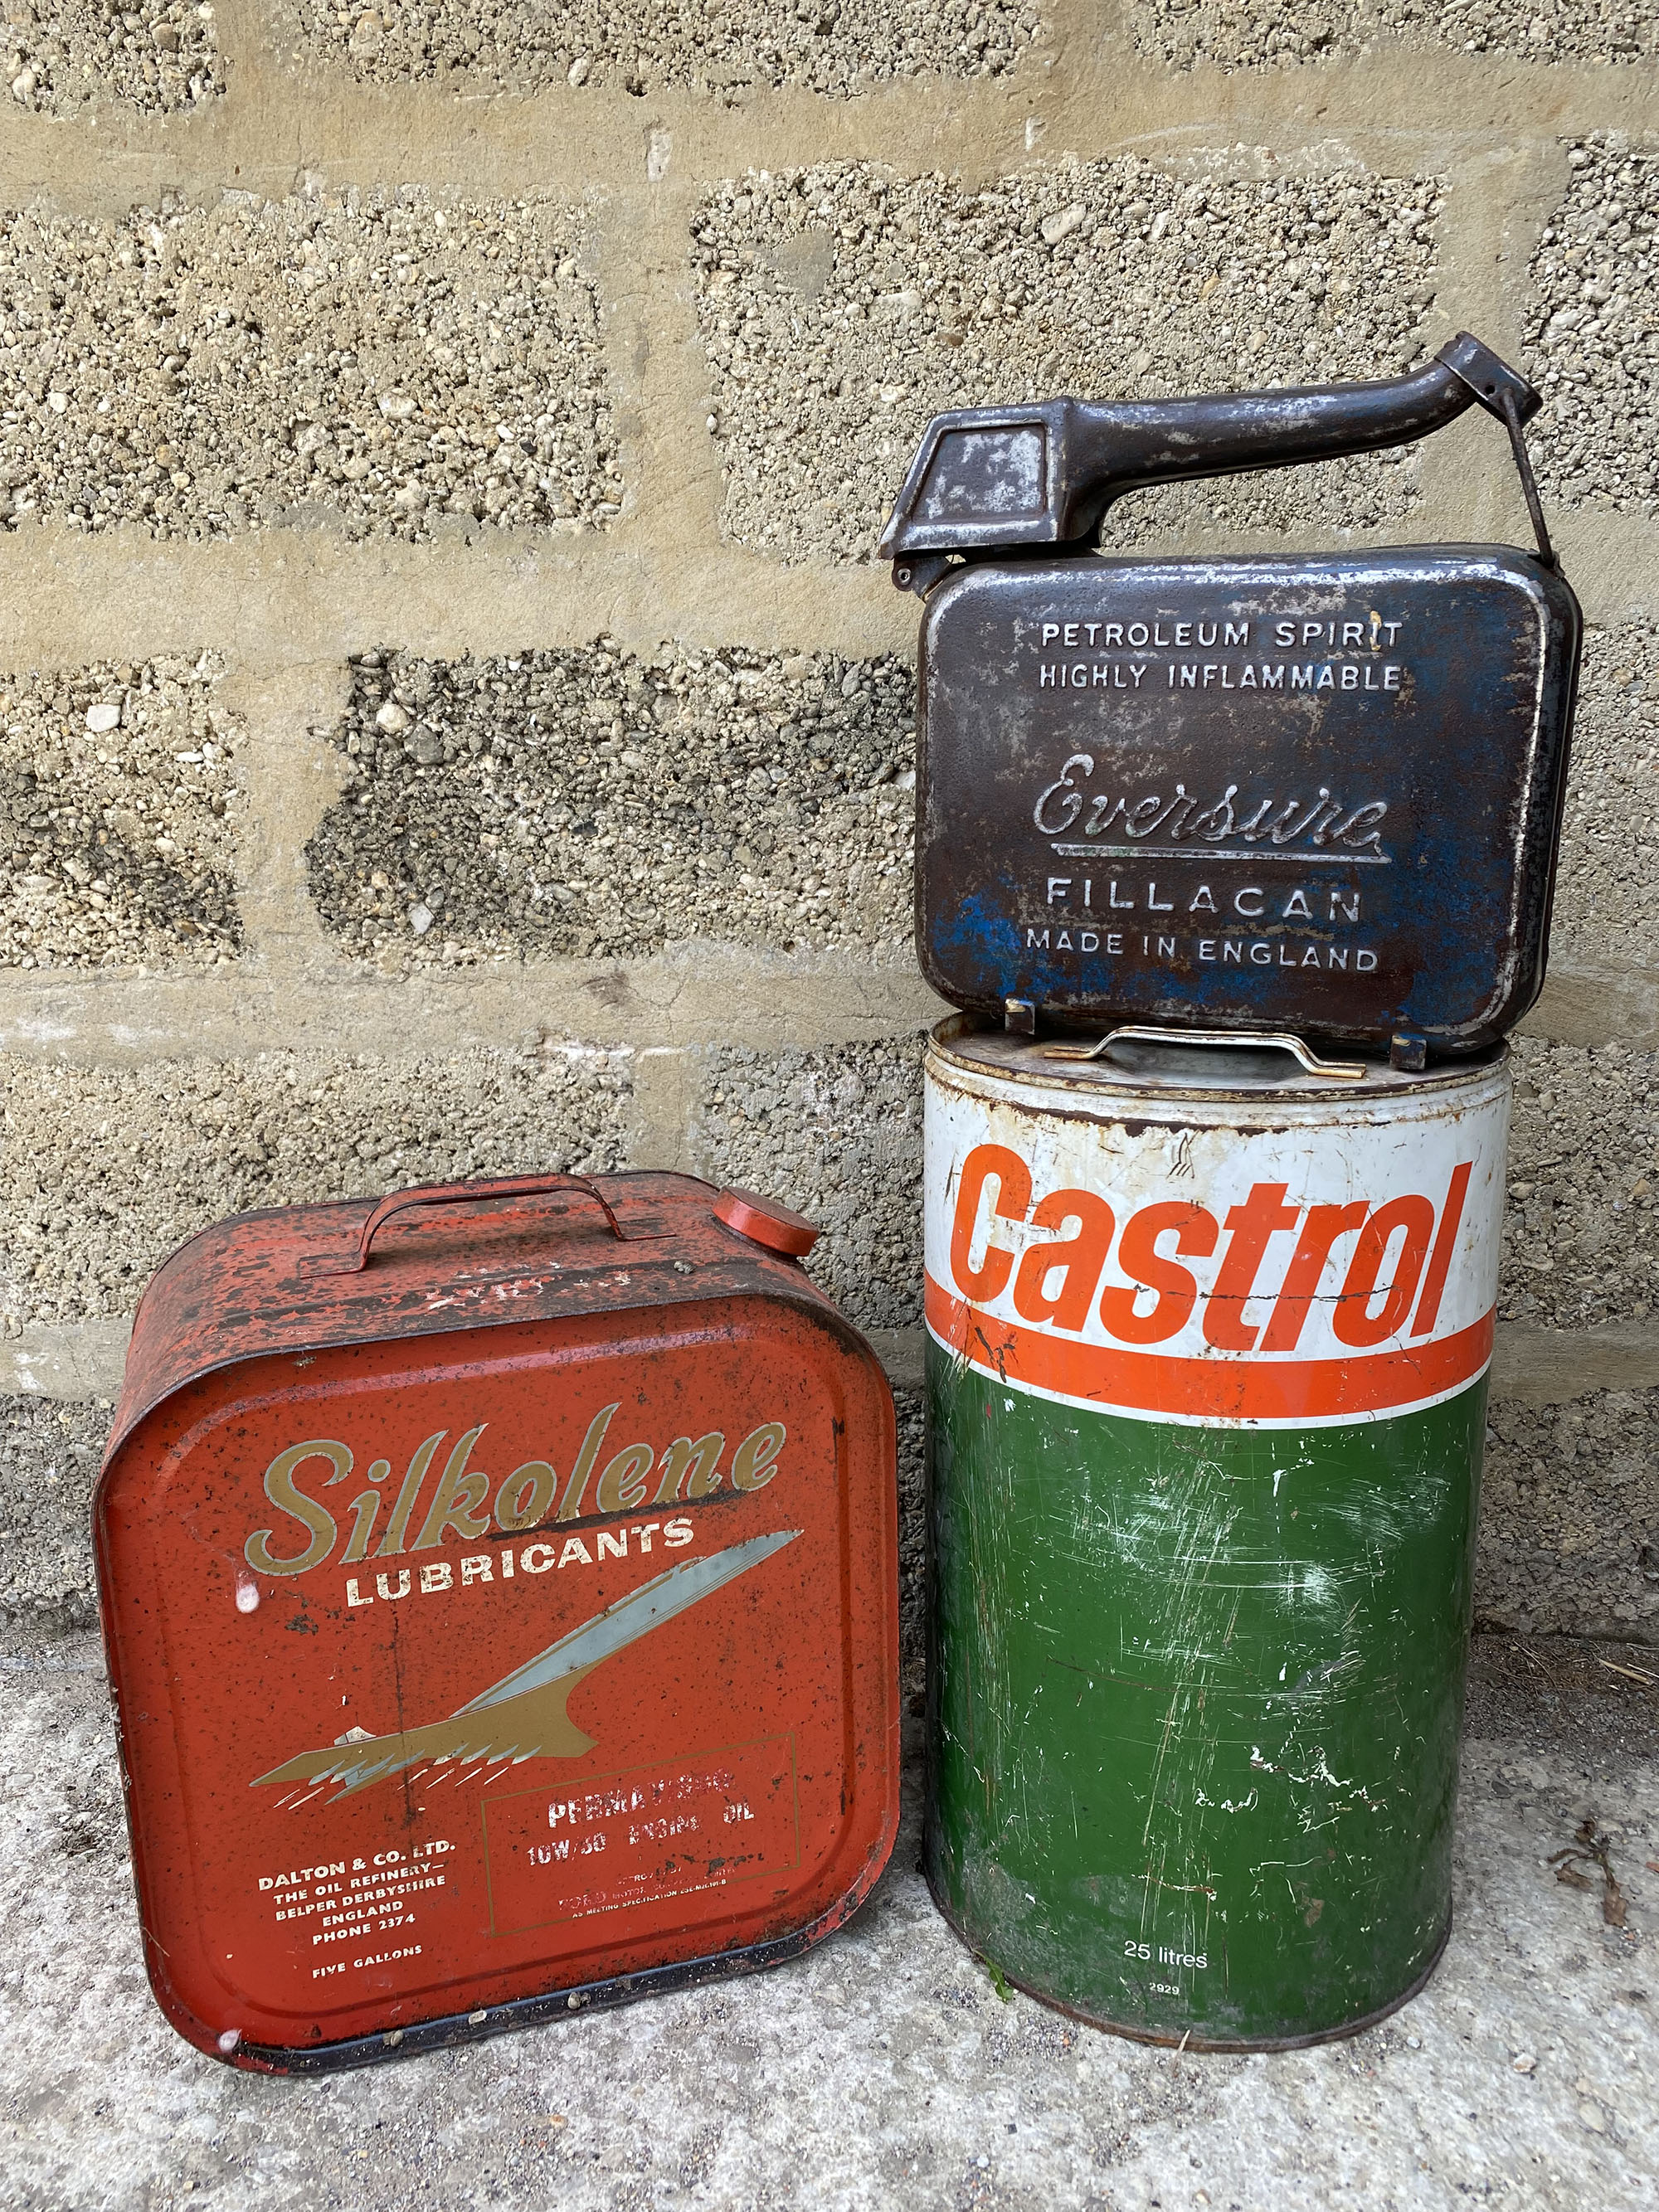 A Silkolene Lubricants five gallon can, a Castrol drum and an Eversure fuel can.